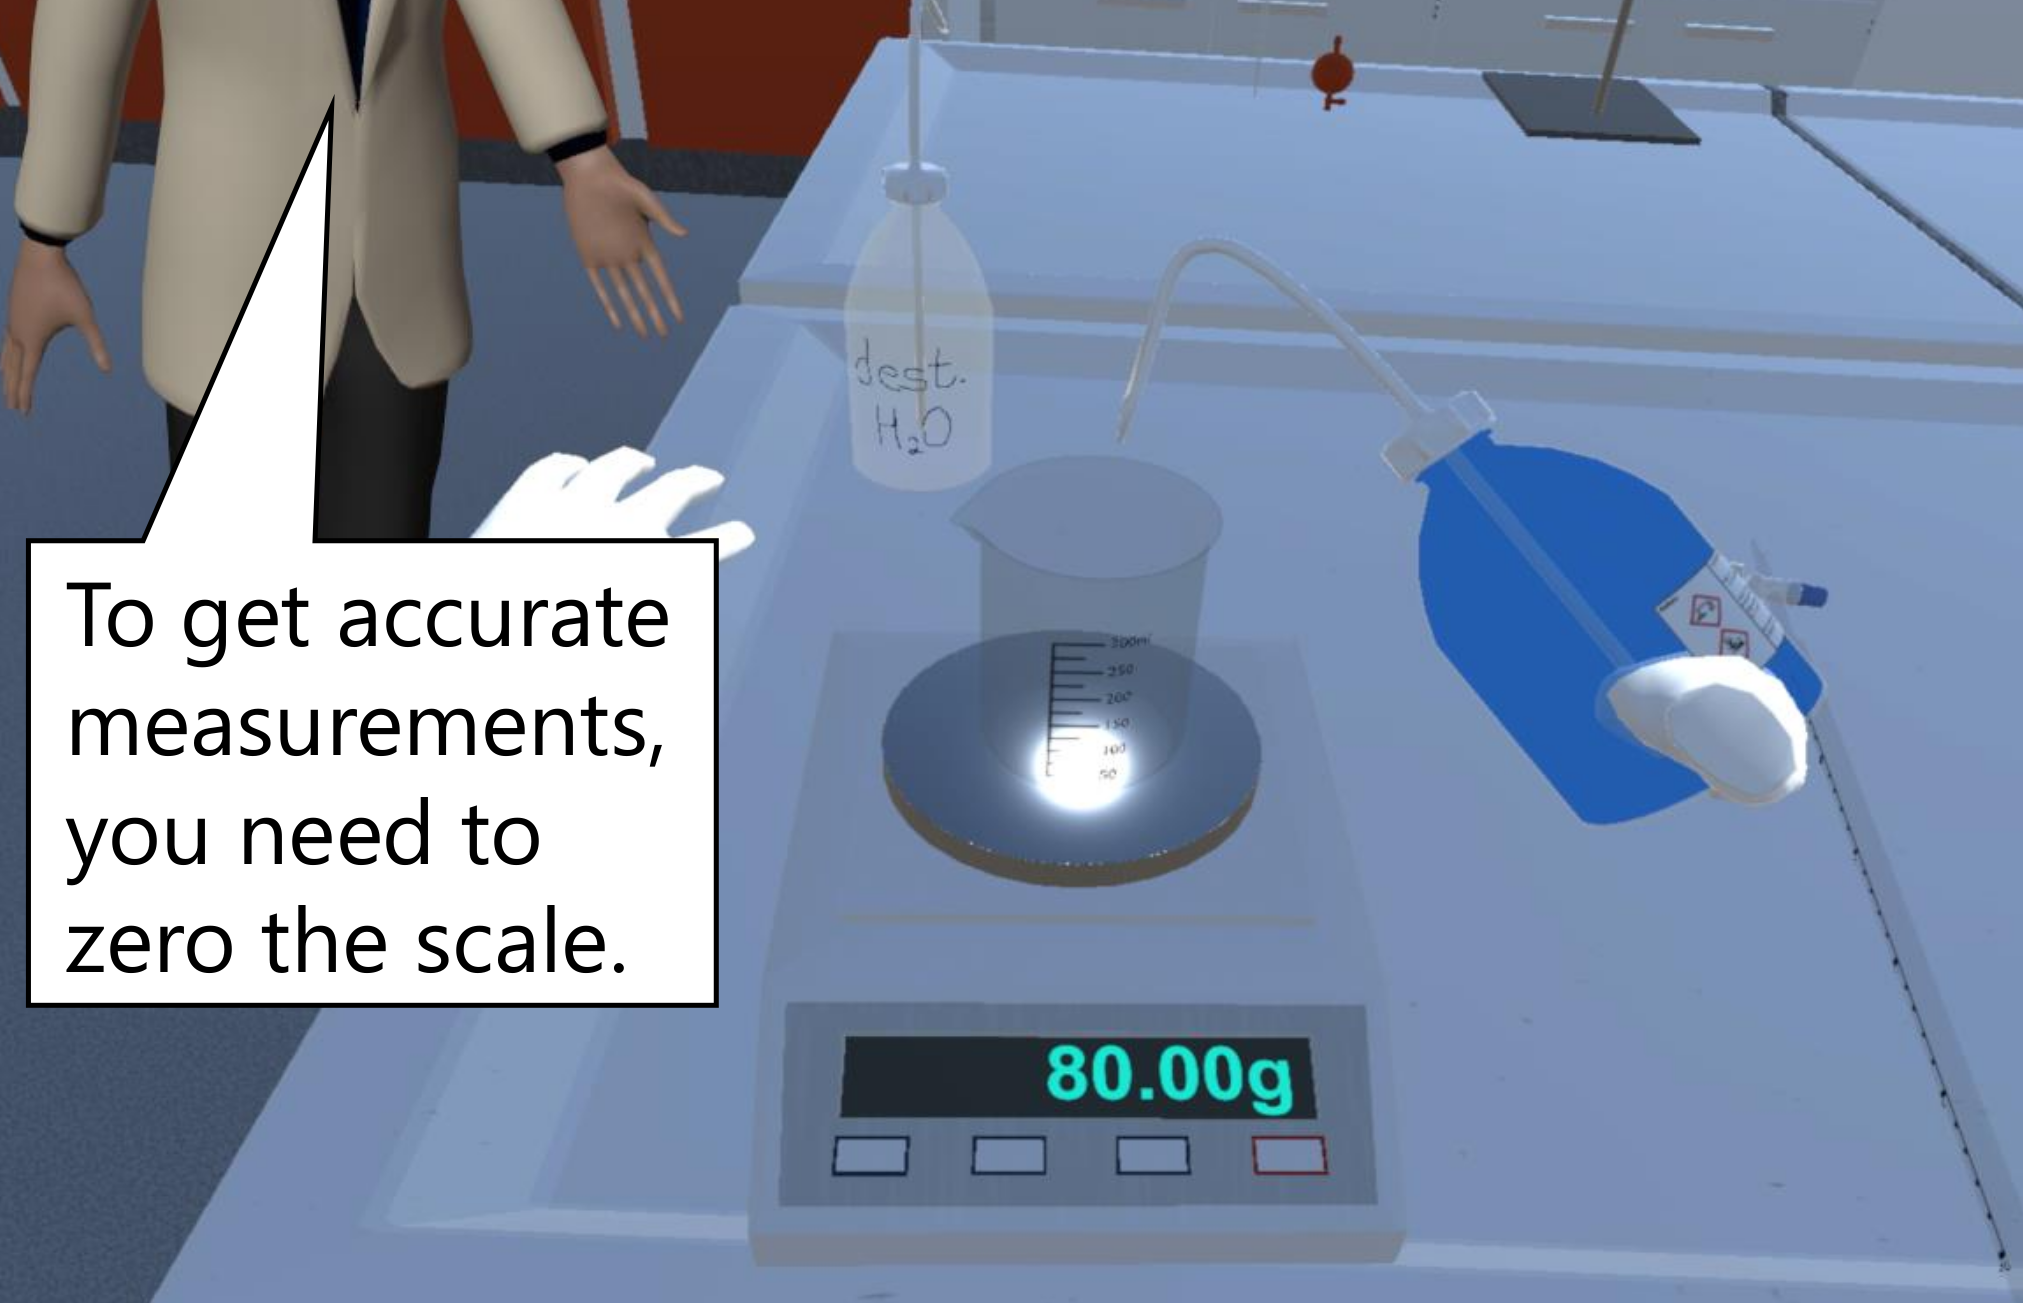 A mock-up of the tutor intervening the actions of a student. The tutor tells the student who is trying to weigh a chemical that they need to zero the scale beforehand.